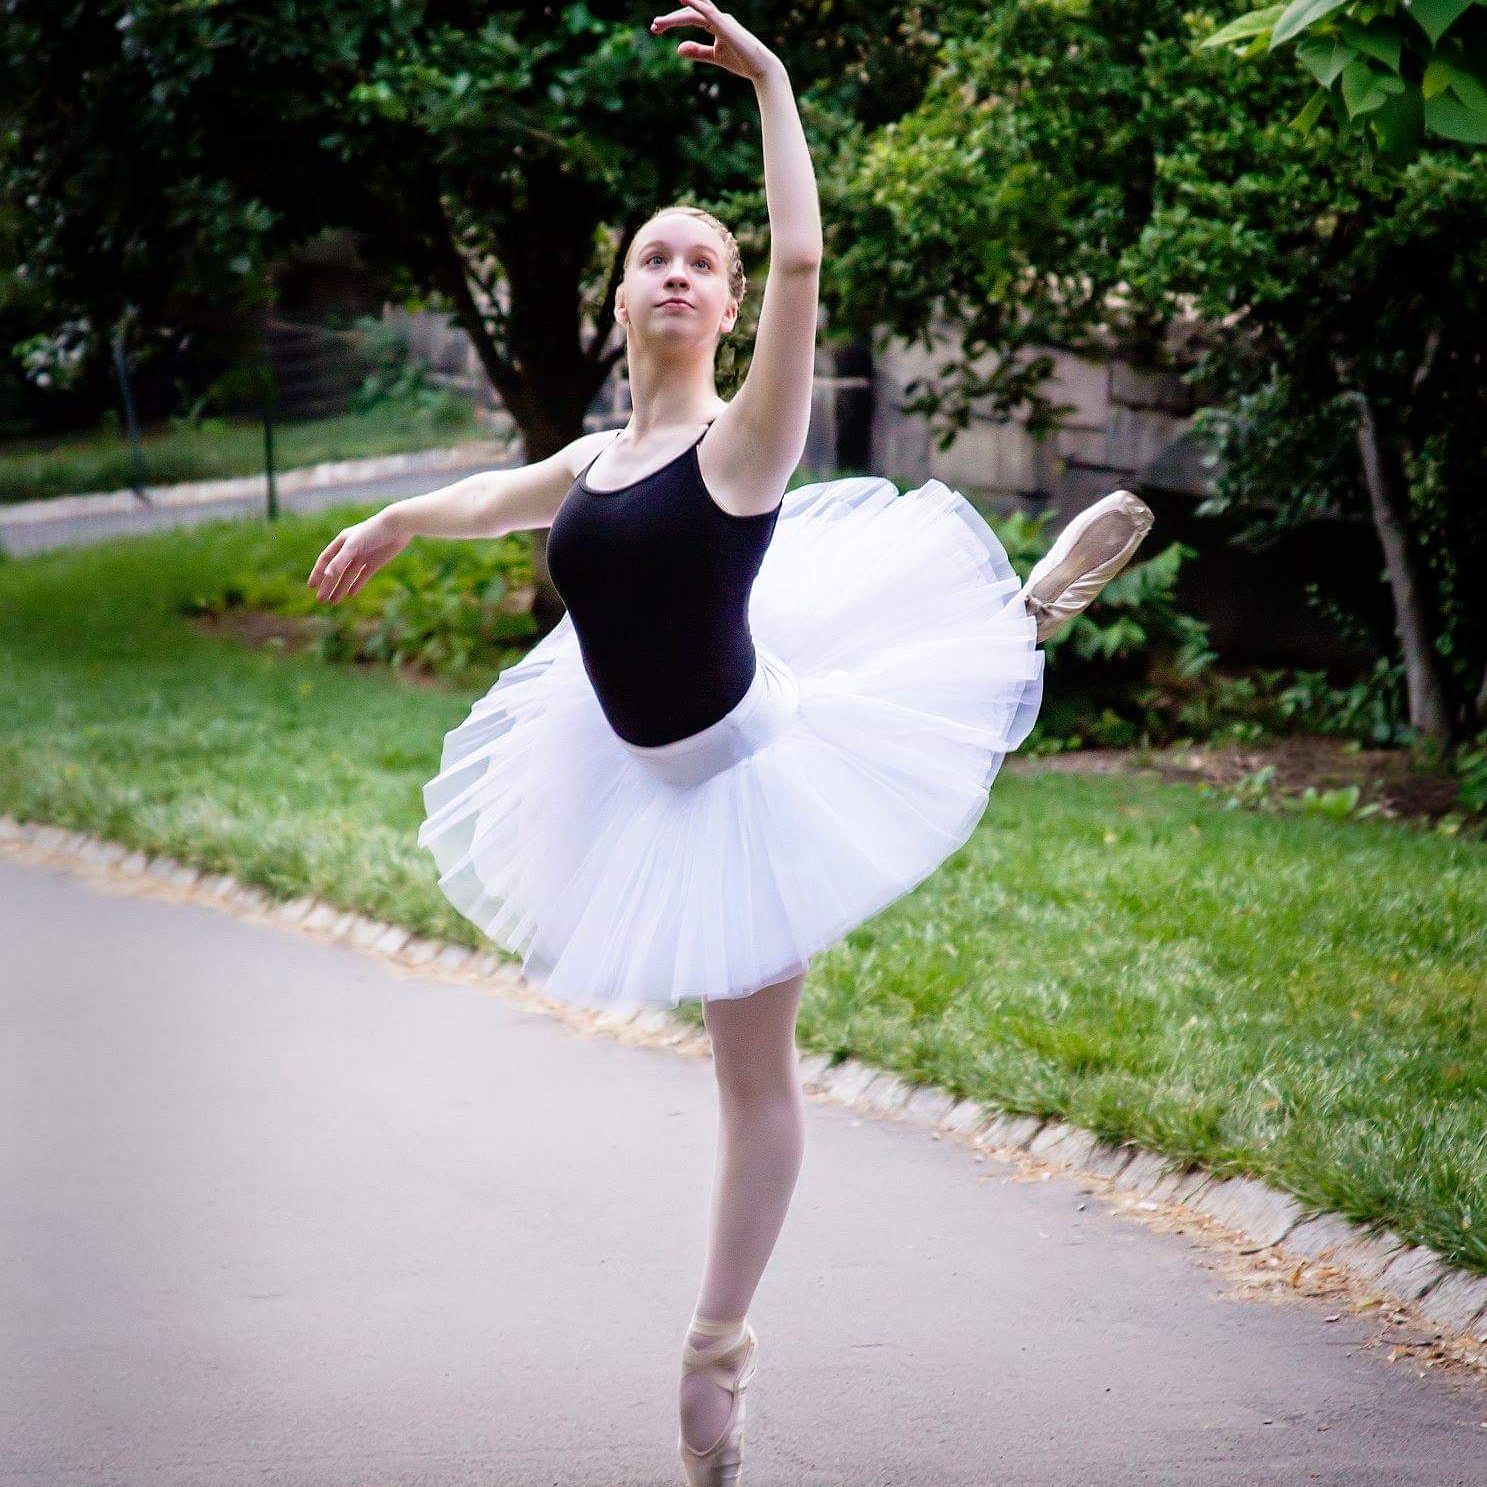 Jessica in an attitude ballet position on pointe in a park.